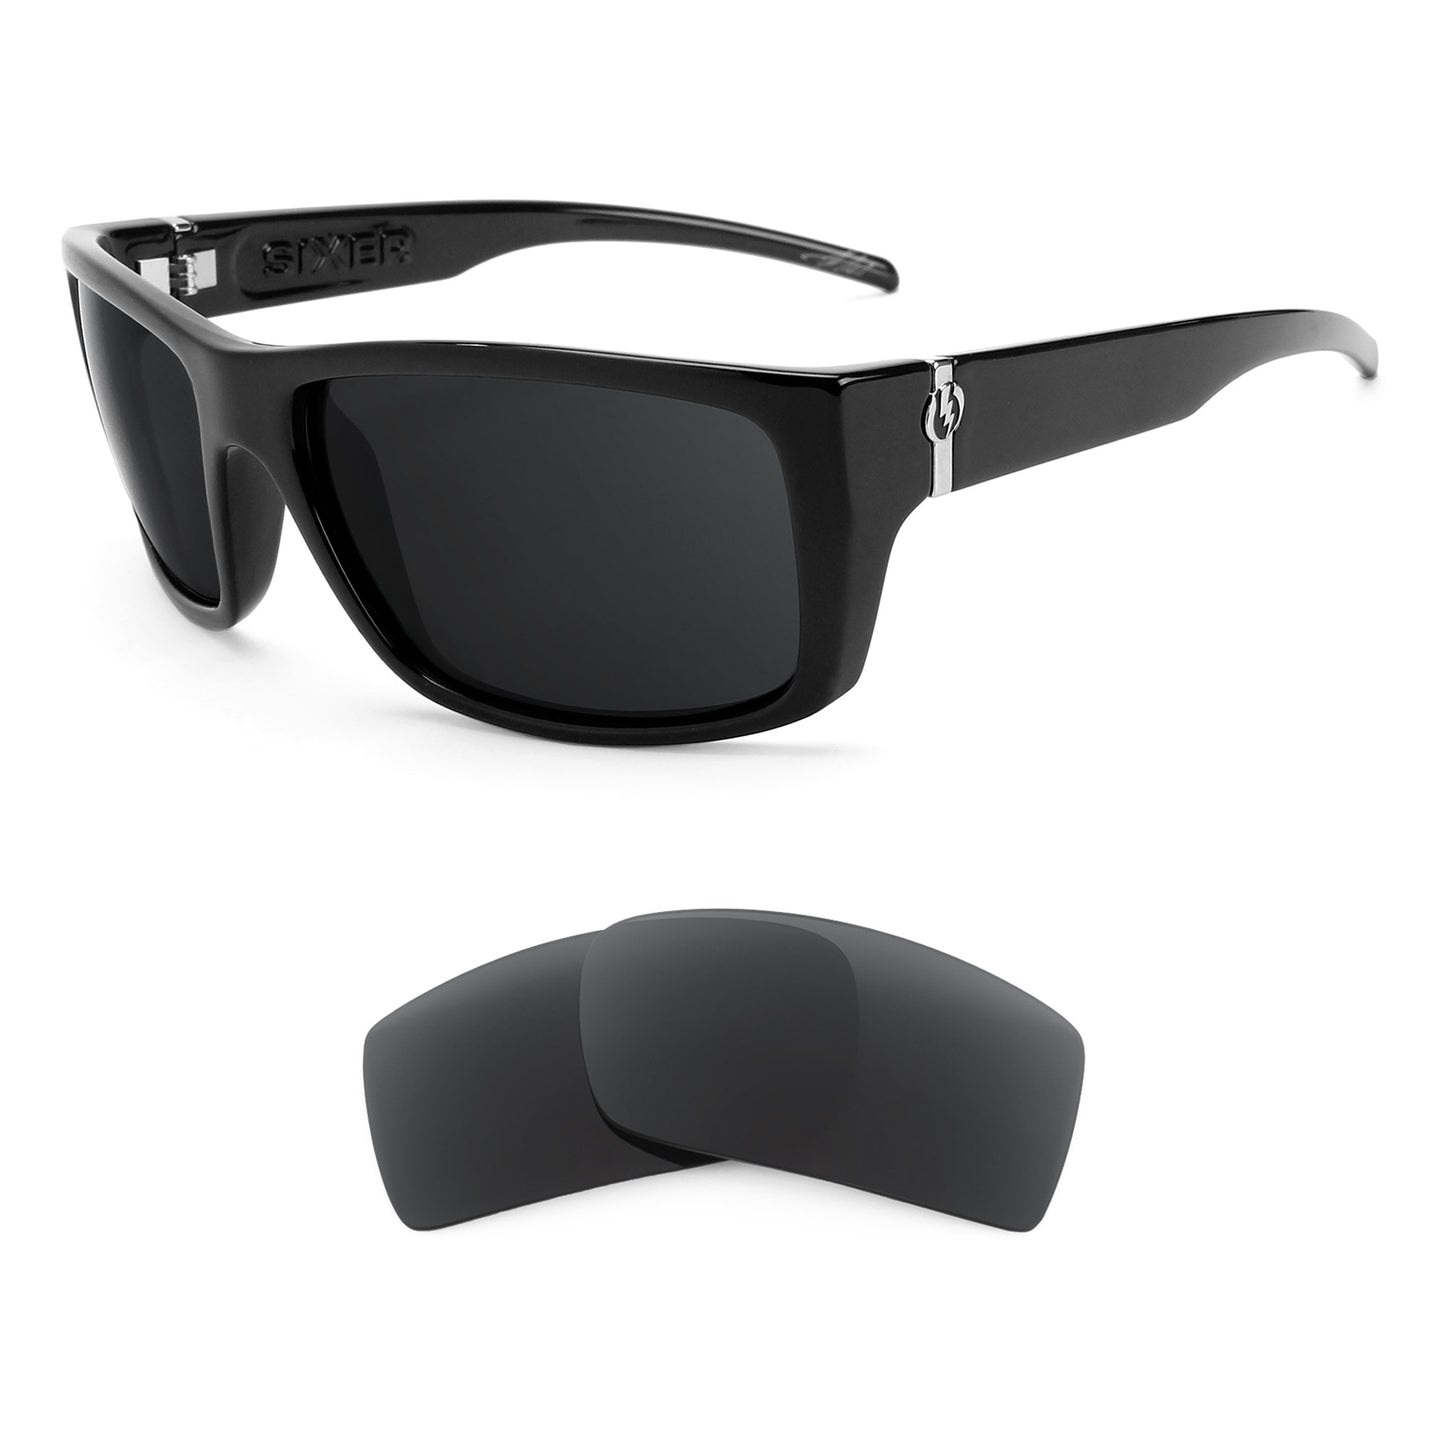 Electric Sixer sunglasses with replacement lenses